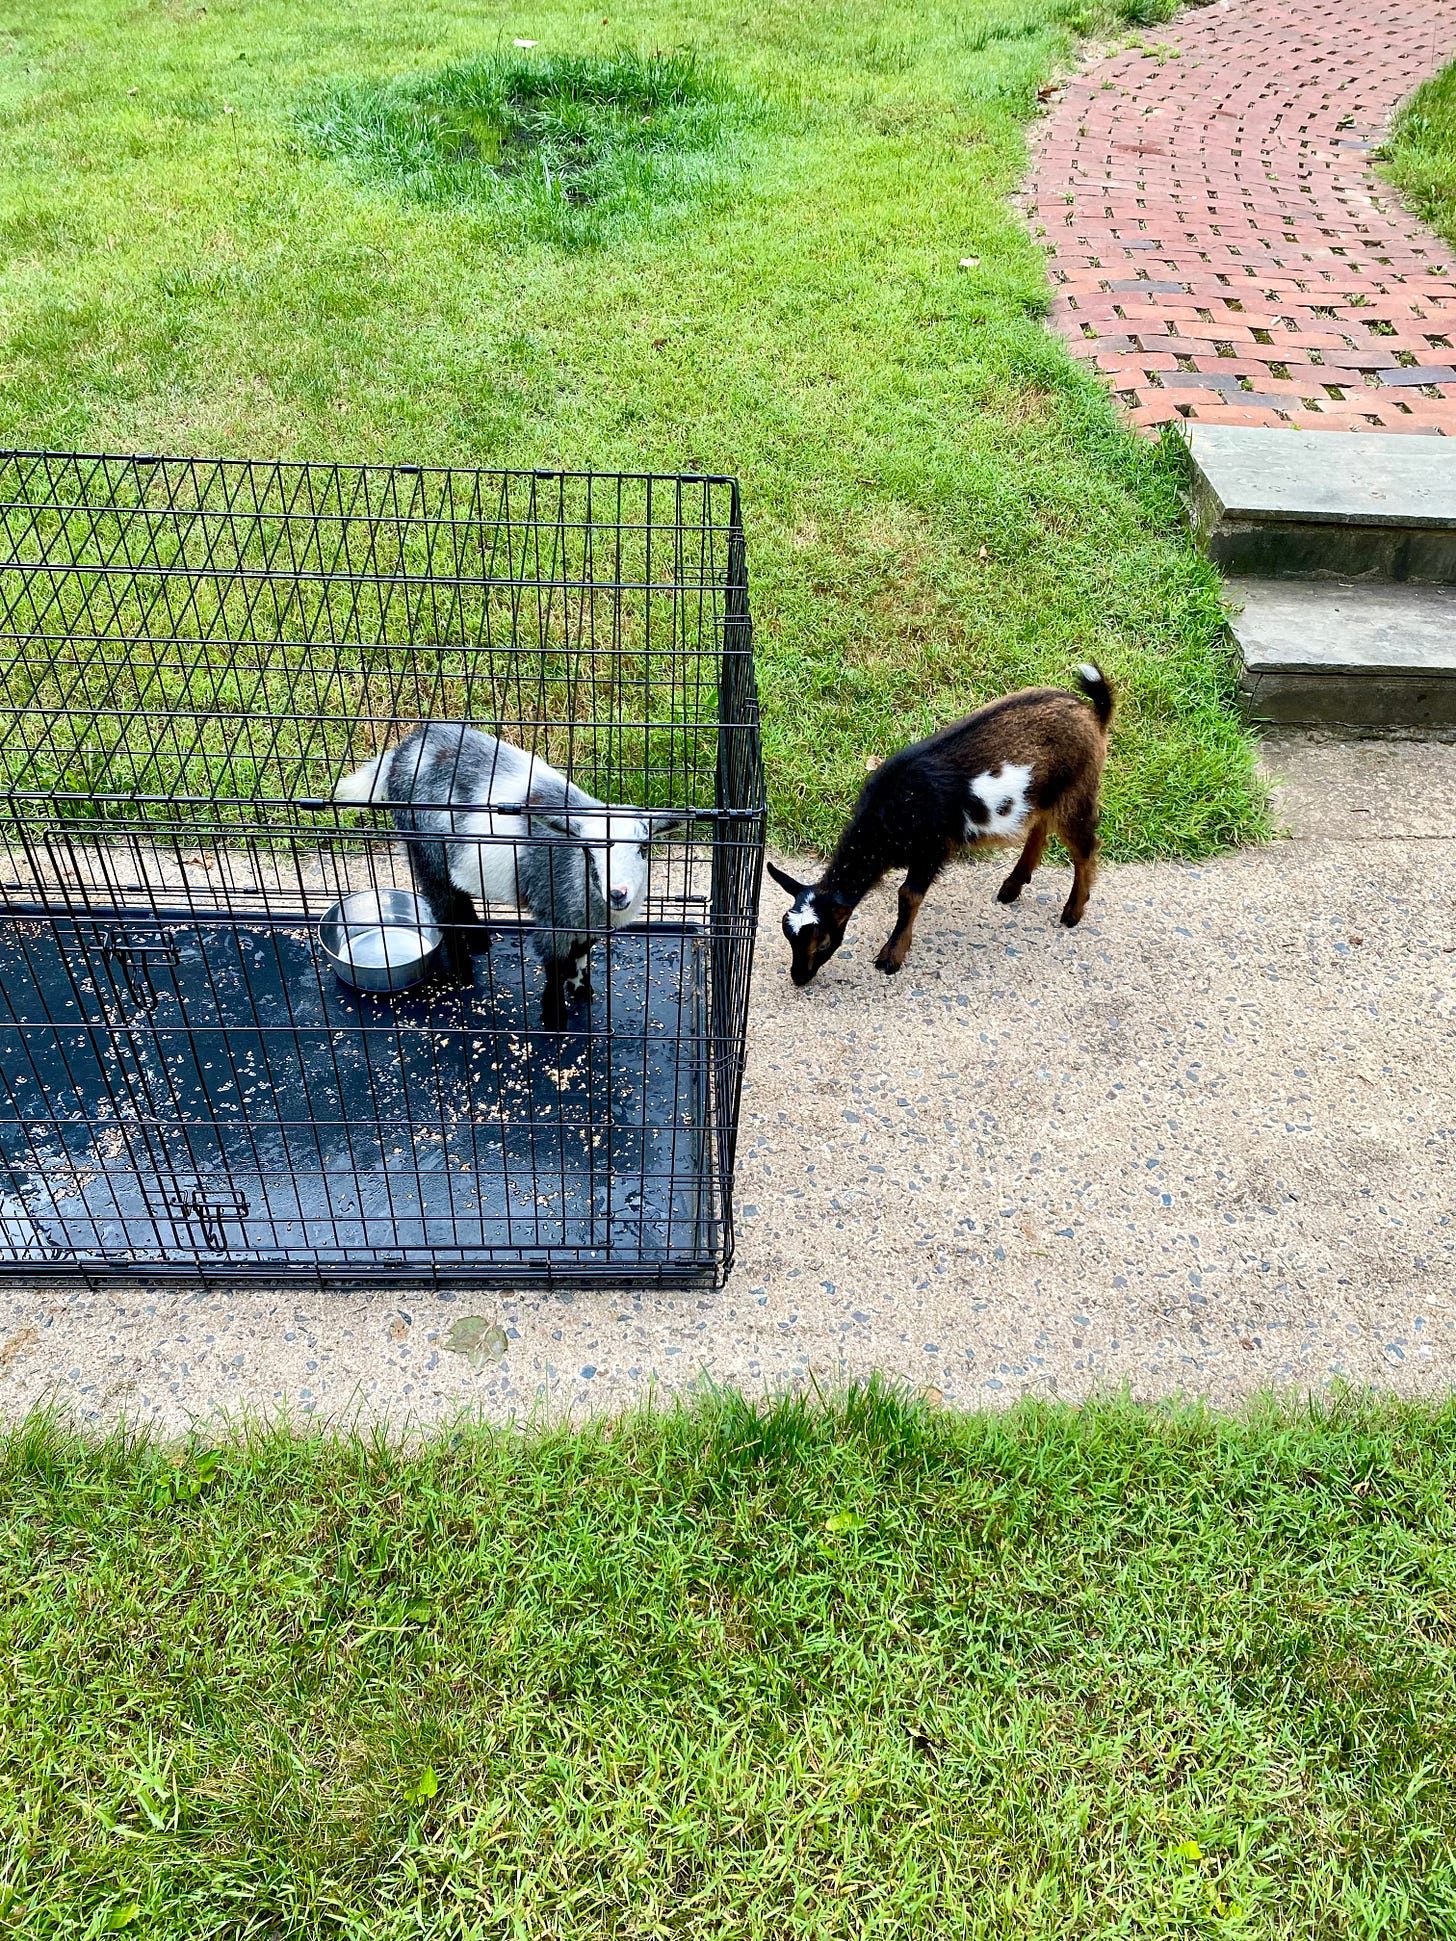 Goats in a dog crate